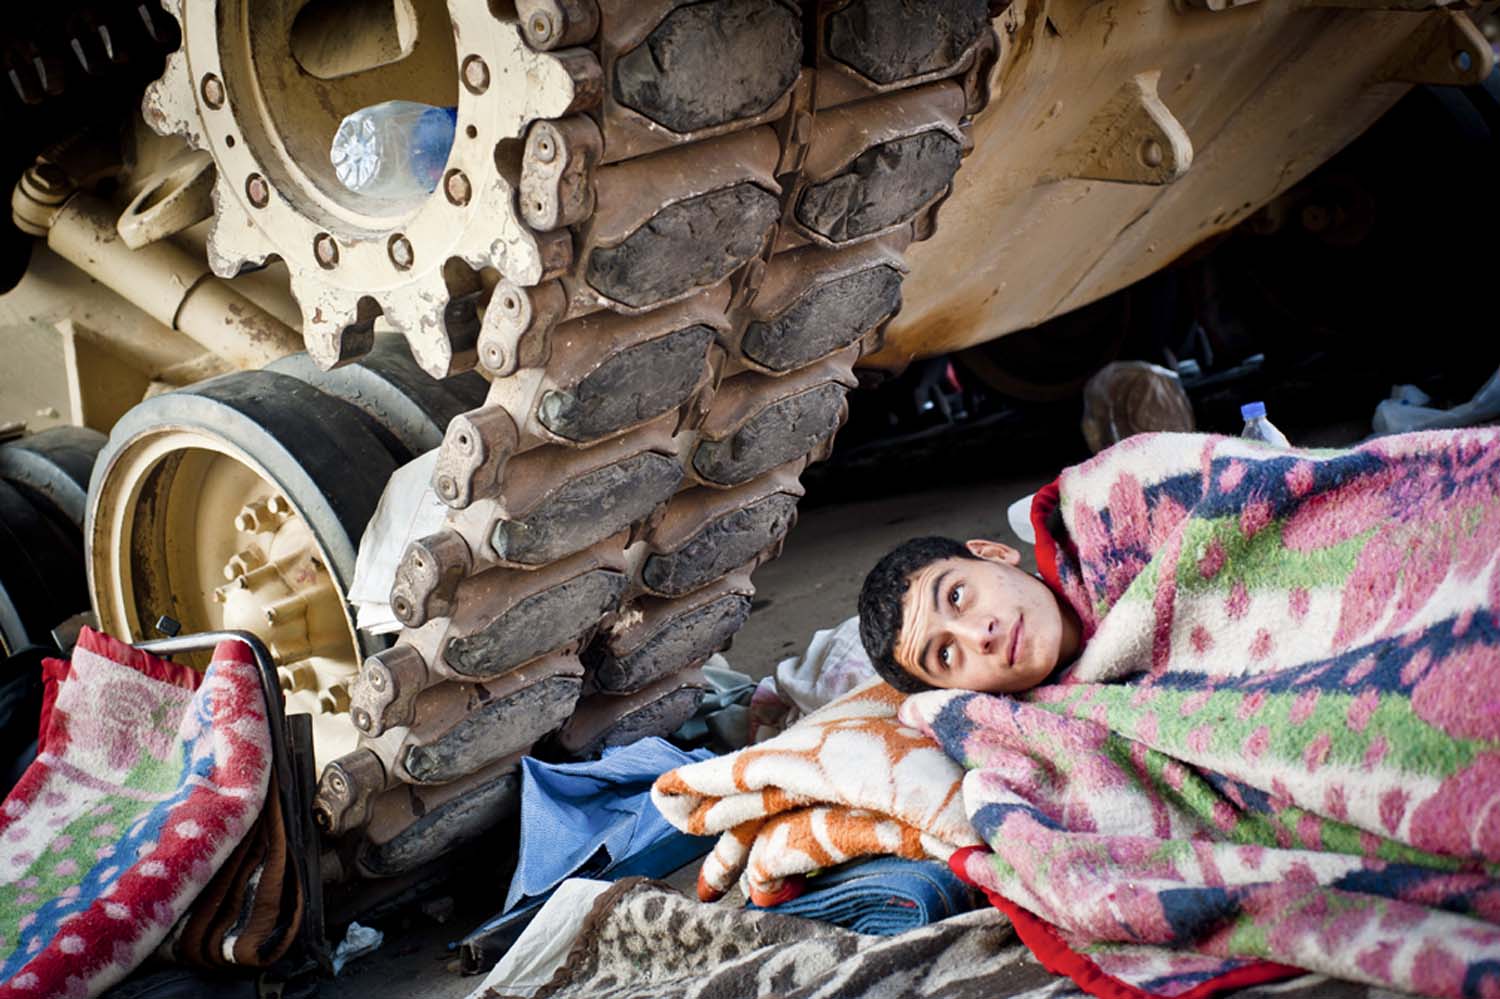 A boy rests under the treads of an Egyptian army tank in Tahrir Square, in downtown Cairo. Protesters gathered there beginning on January 25, 2011, calling for the ouster of President Hosni Mubarak, who had ruled the country unopposed since 1981